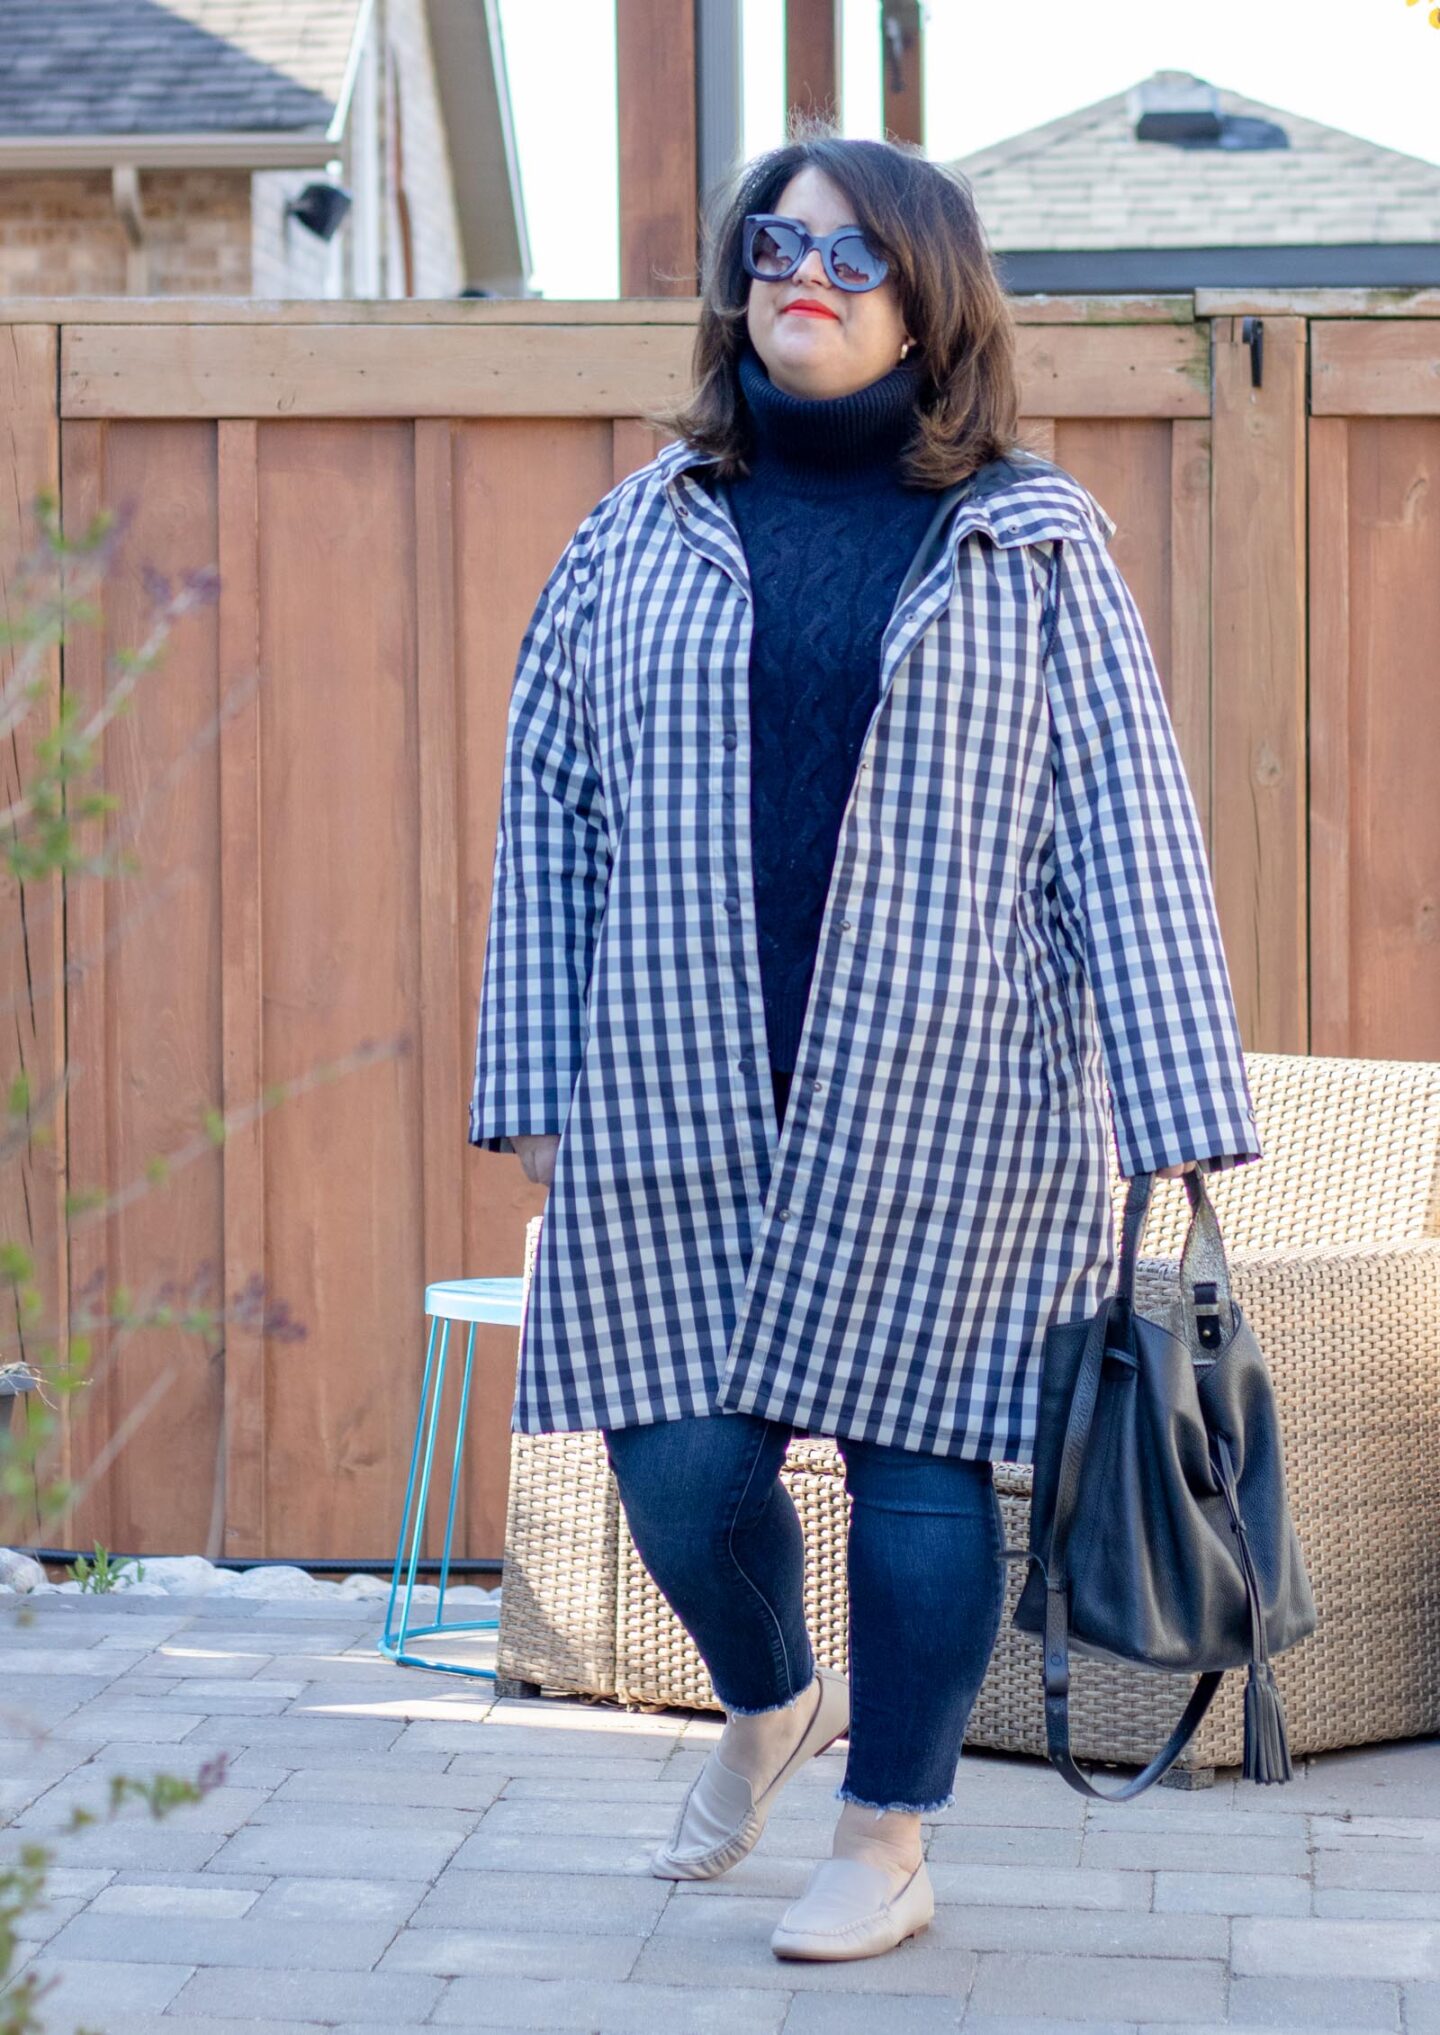 gingham raincoat outfit spring style